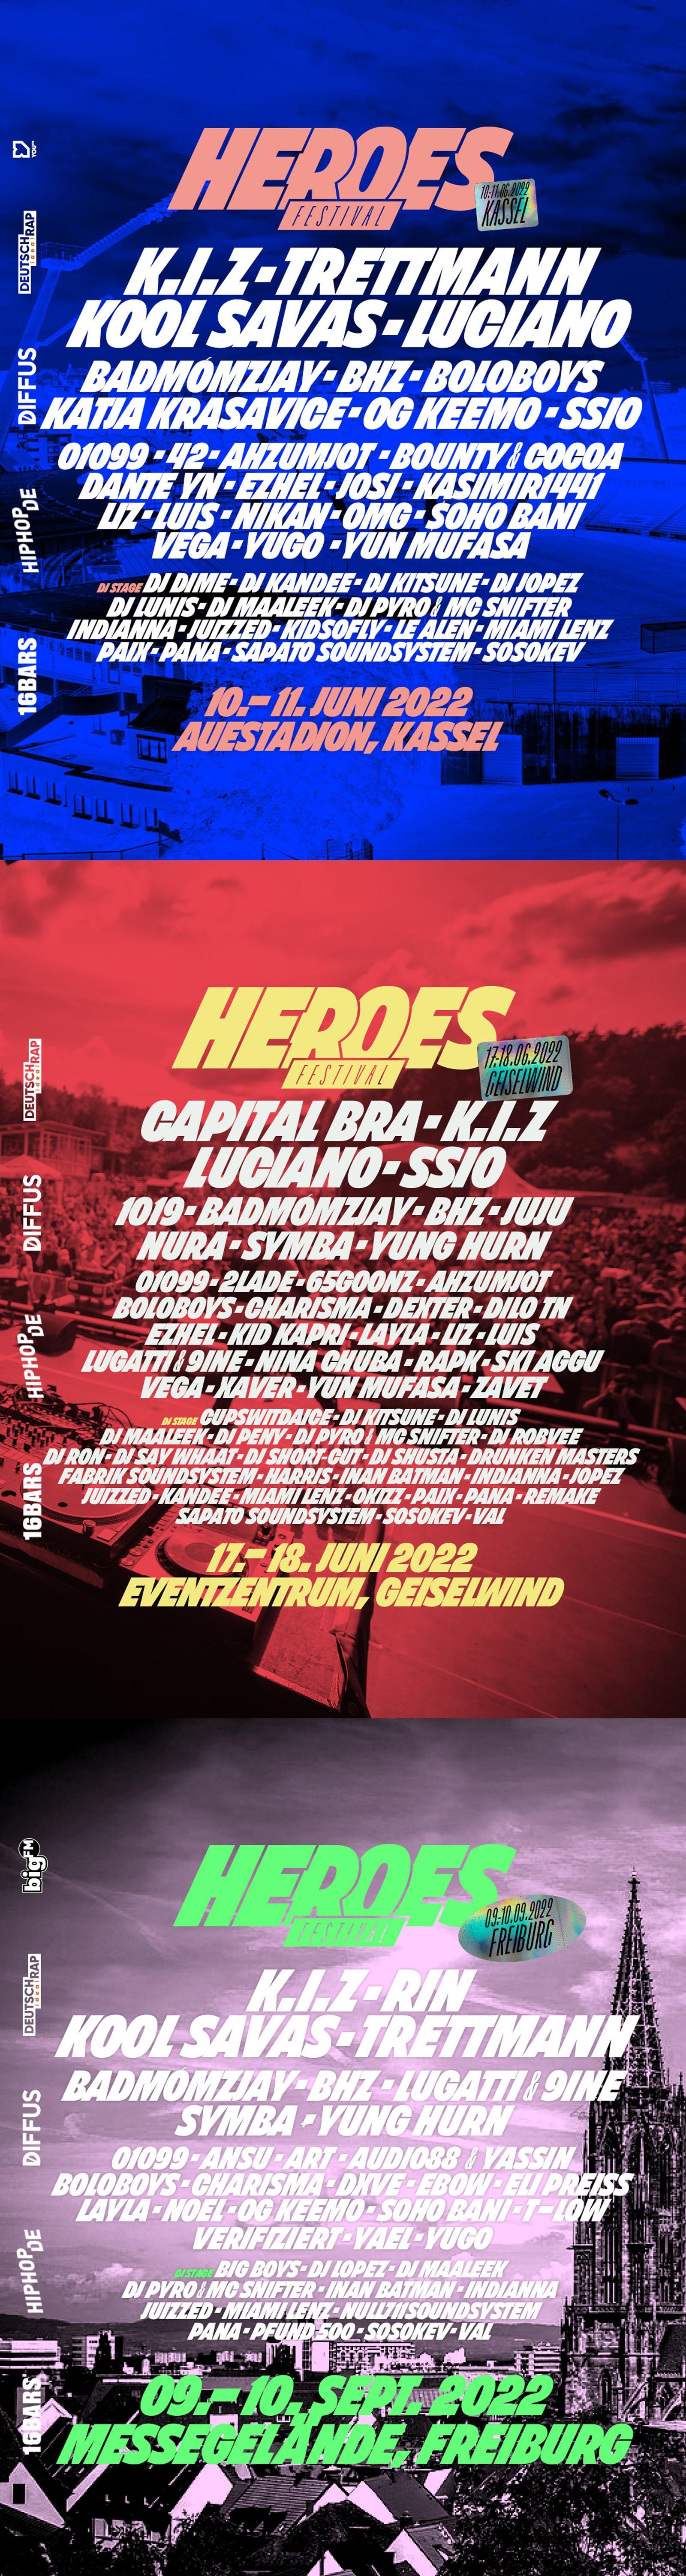 Heroes Festival: Alle Acts